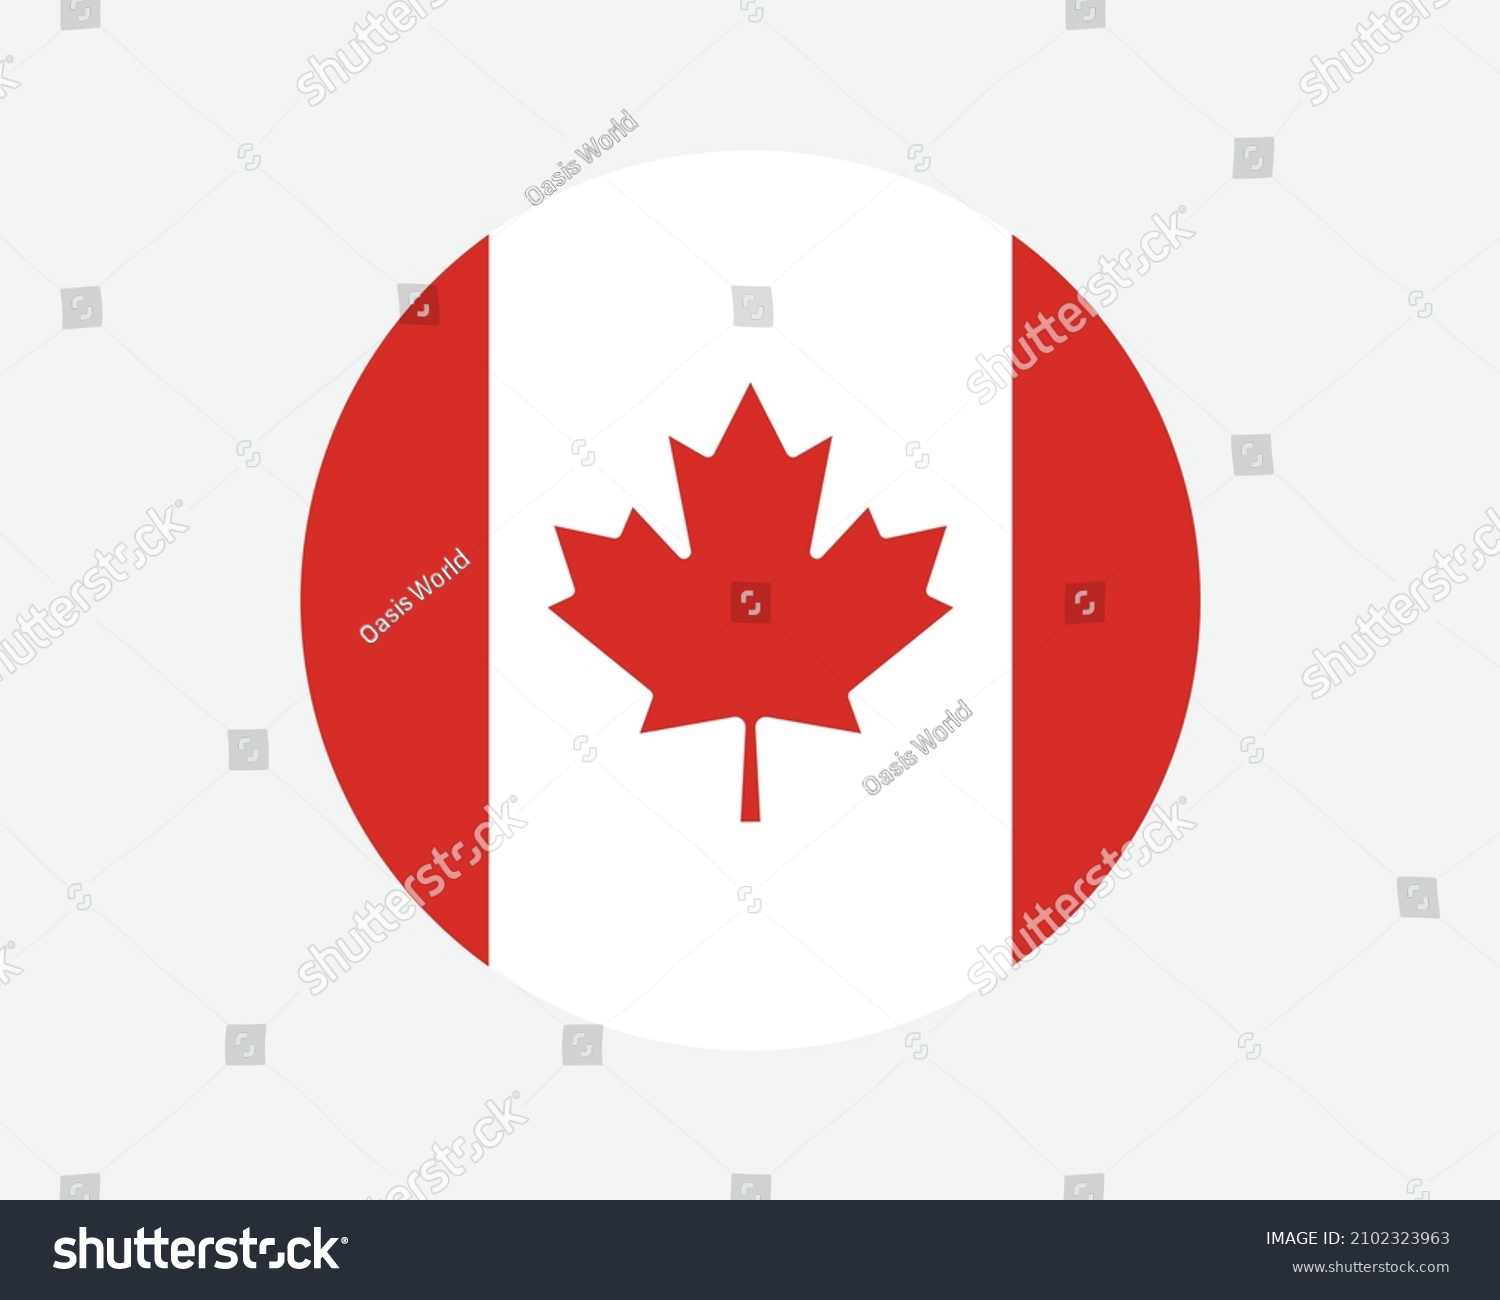 SVG of Canada Round Country Flag. Circular Canadian National Flag. Canada Circle Shape Button Banner. EPS Vector Illustration. svg